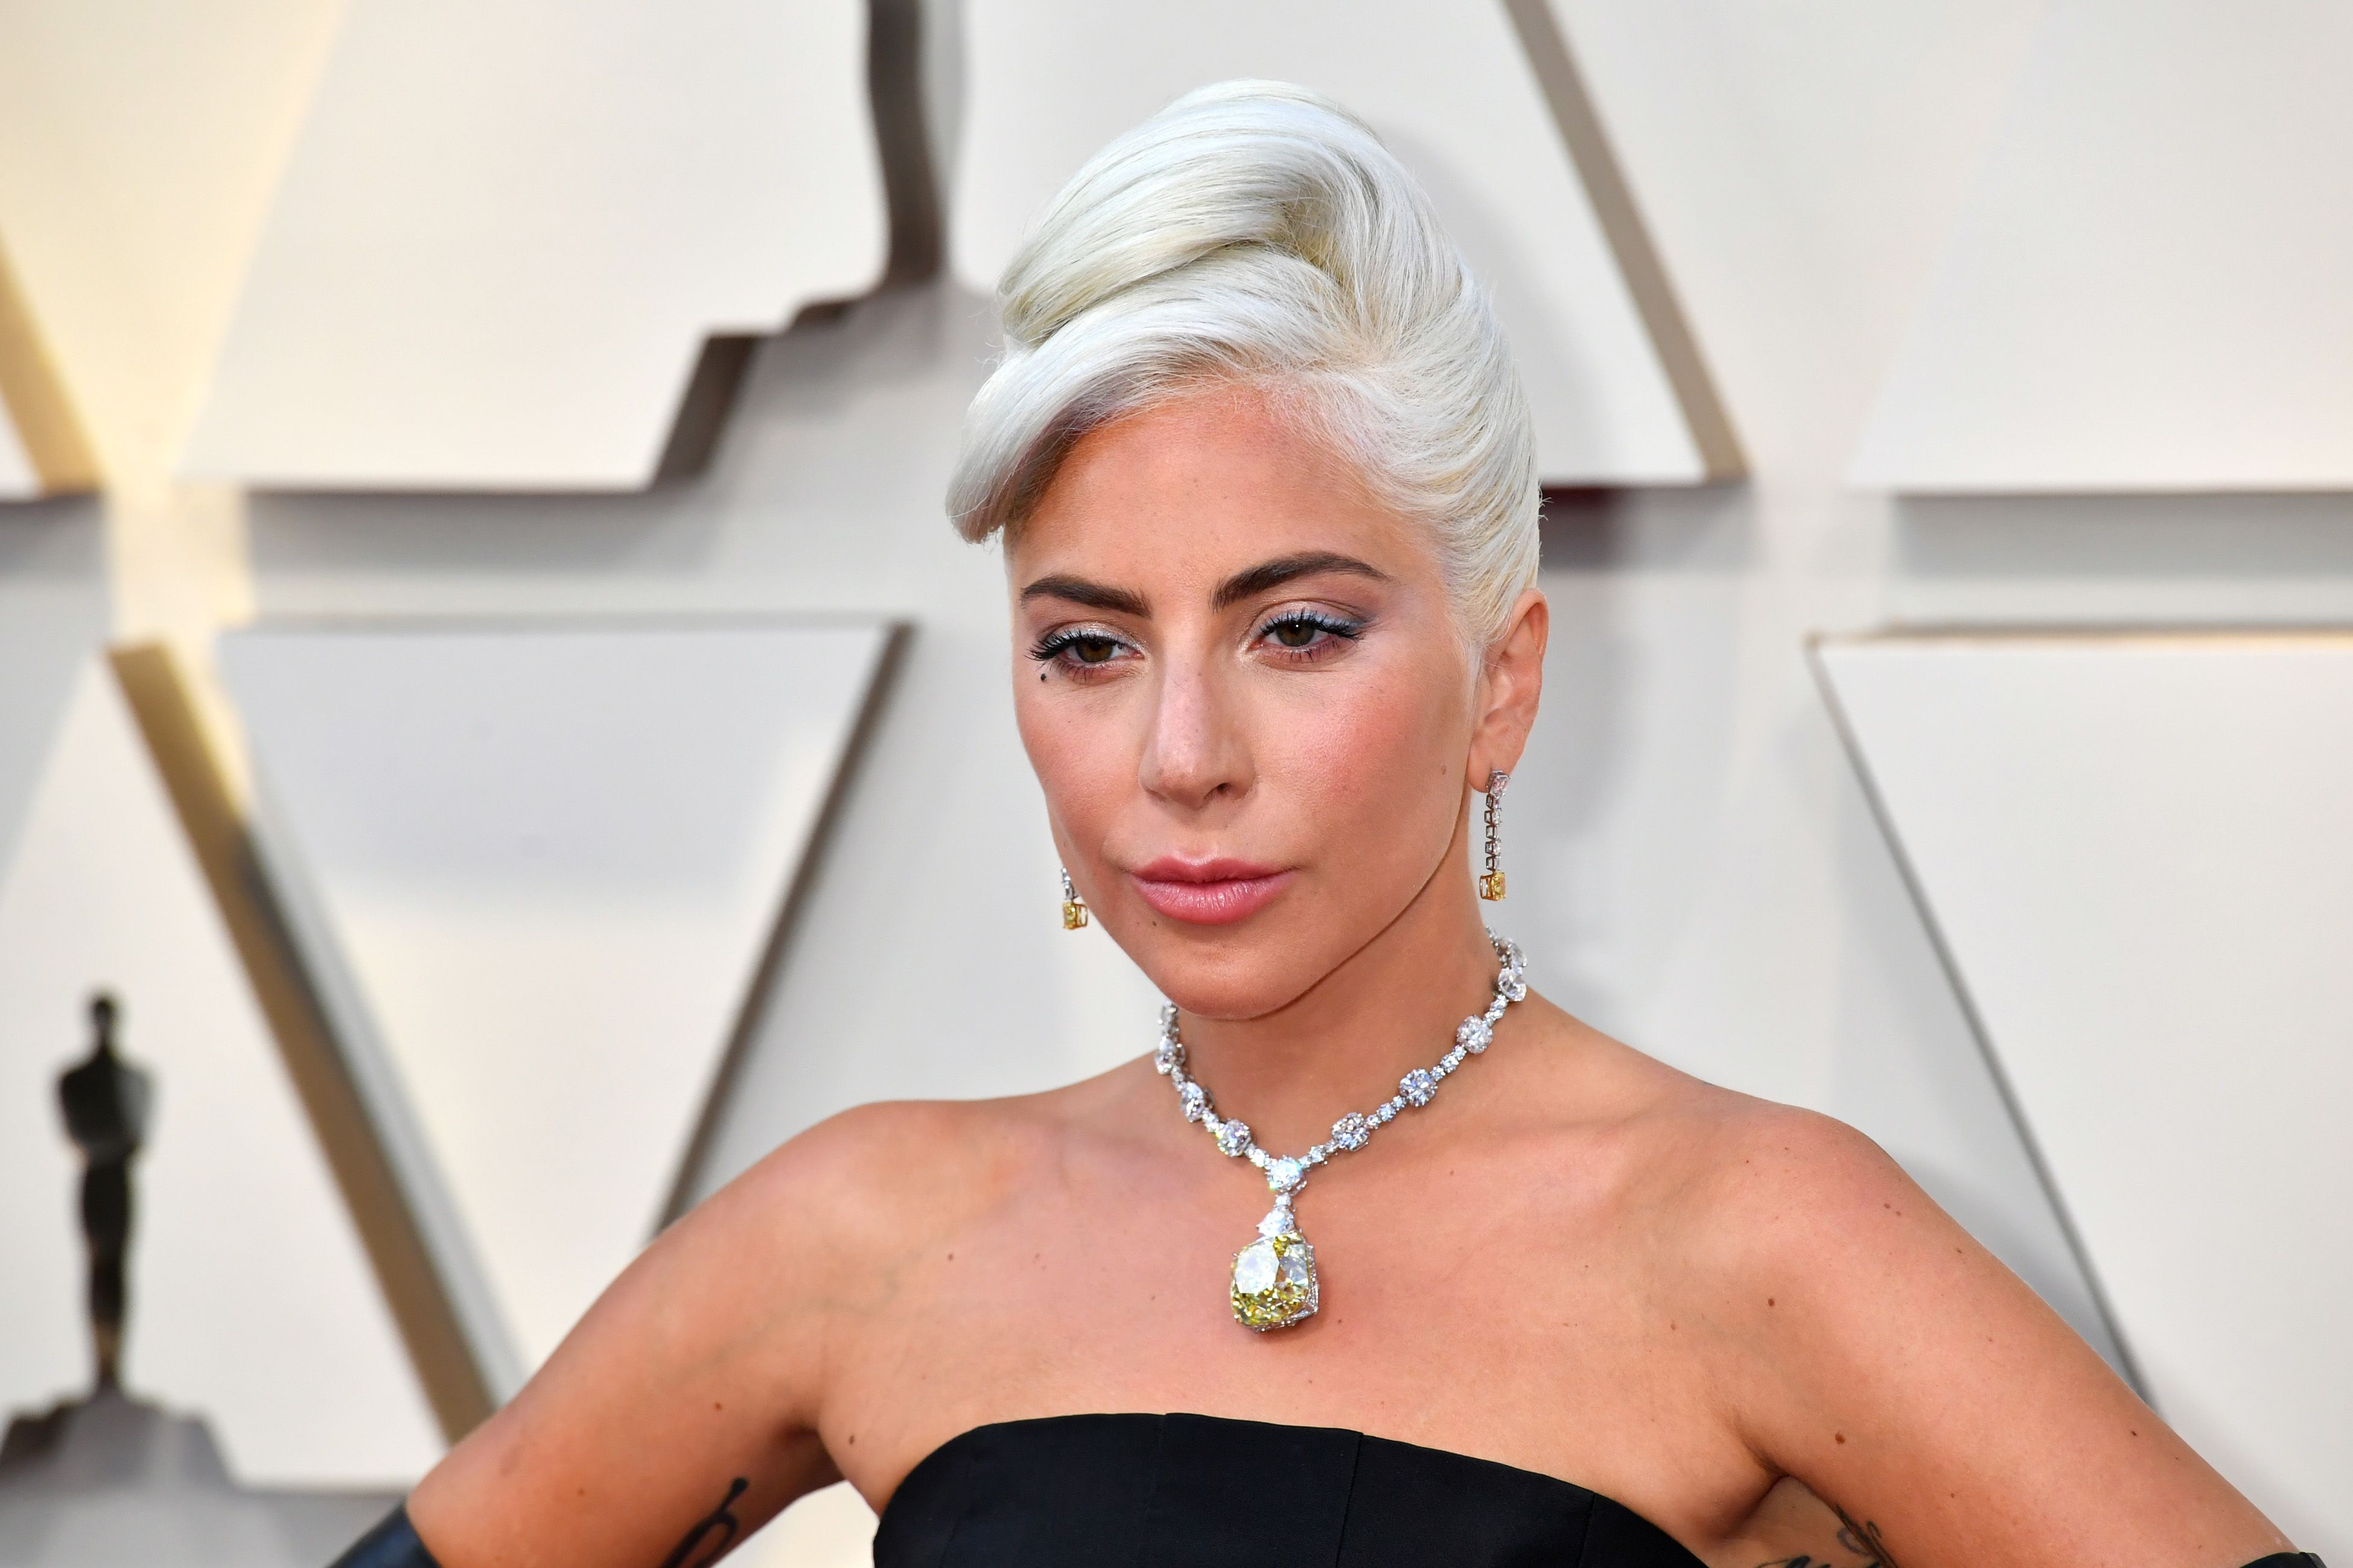 lady gaga's necklace at the oscars